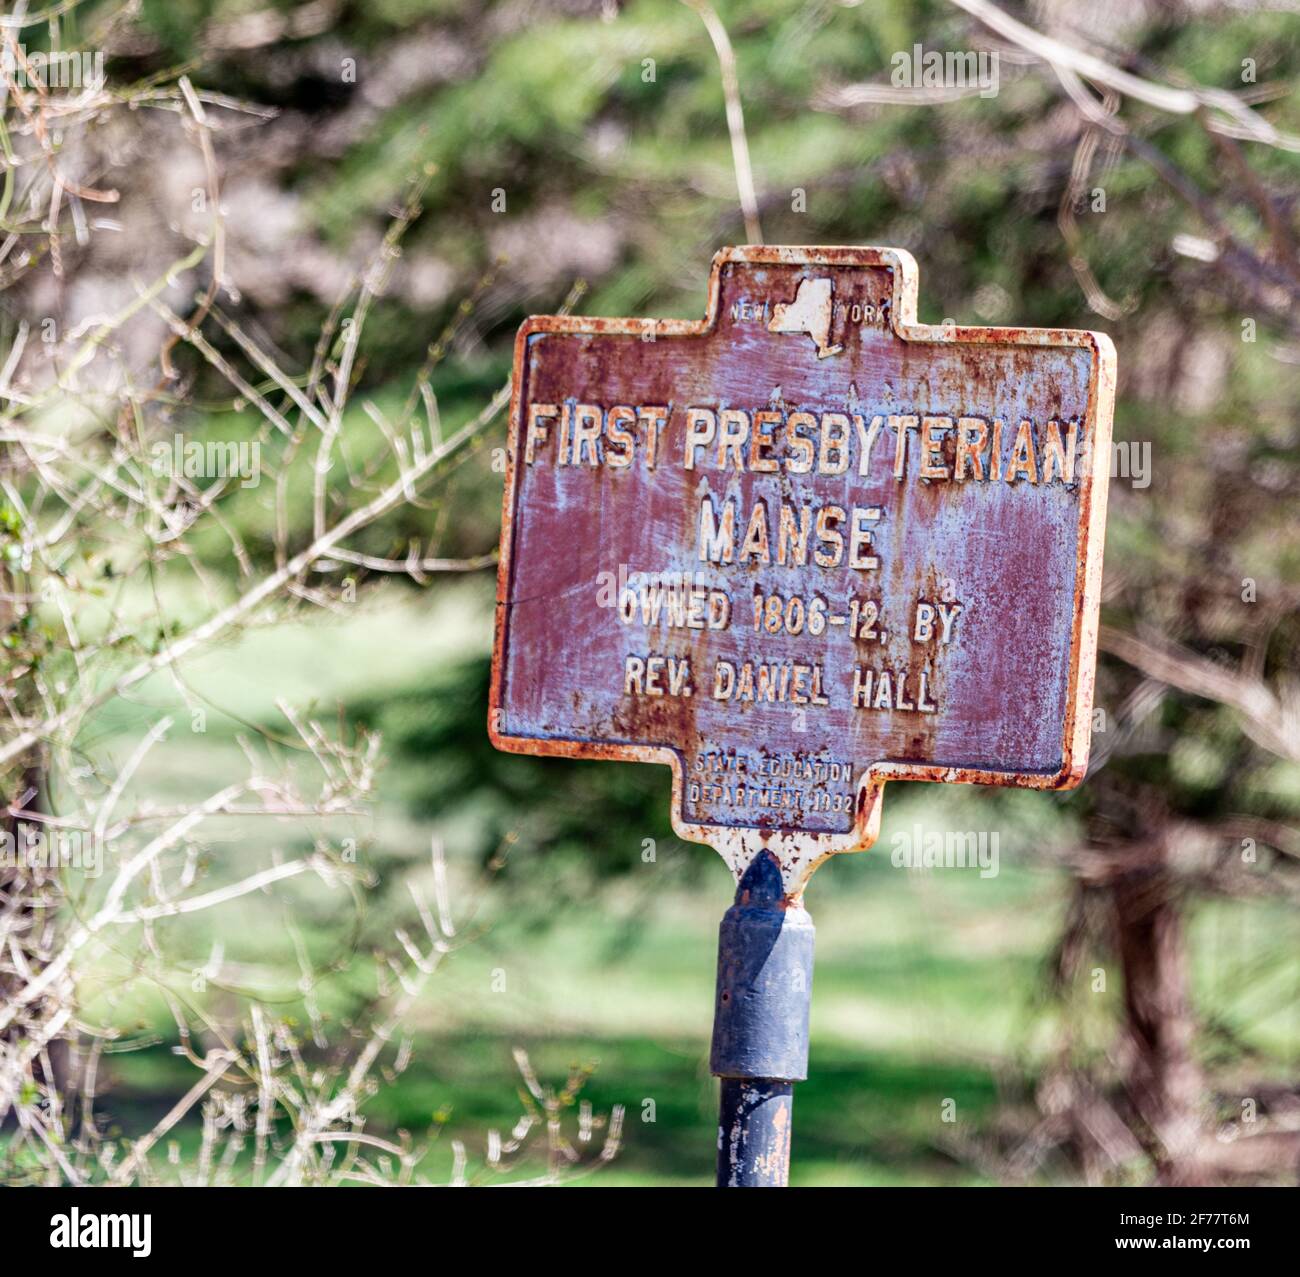 NY State Historical sign for the first Presbyterian Manse on Shelter Island, NY Stock Photo